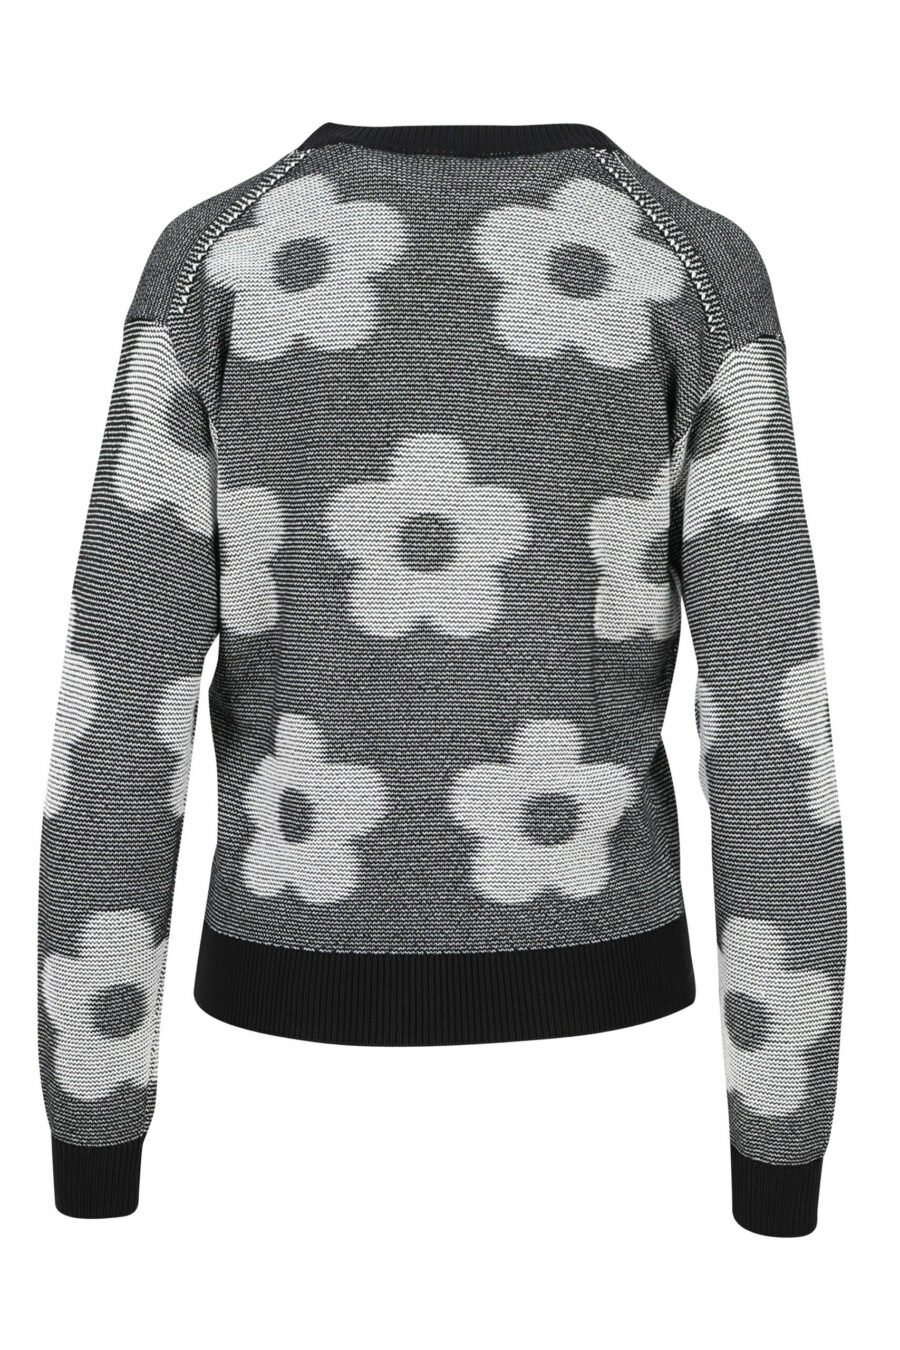 Jersey gris con botones "all over boke flower logo " - 3612230522862 1 scaled